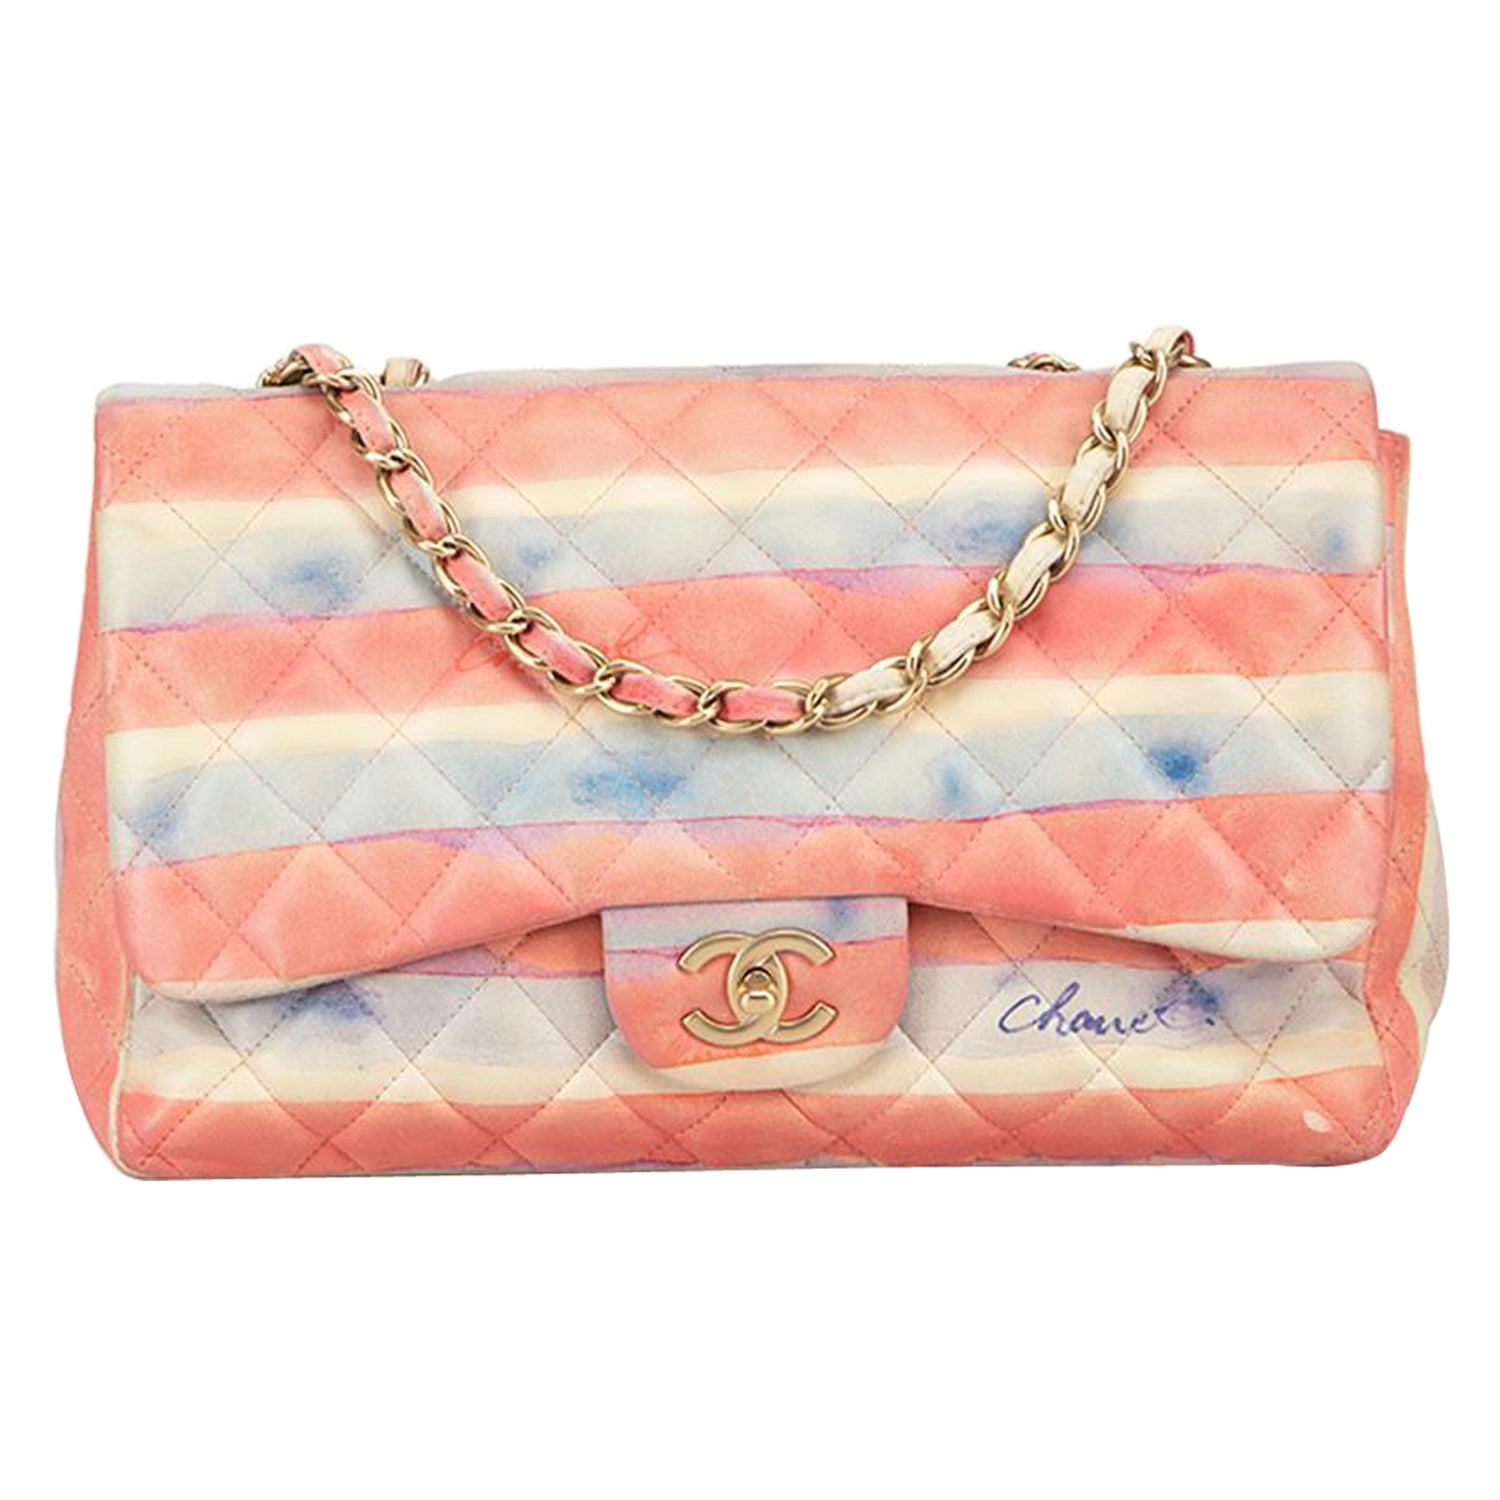 Chanel Watercolor Bag - 7 For Sale on 1stDibs  chanel watercolor  collection, chanel watercolor flap bag, chanel watercolour bag